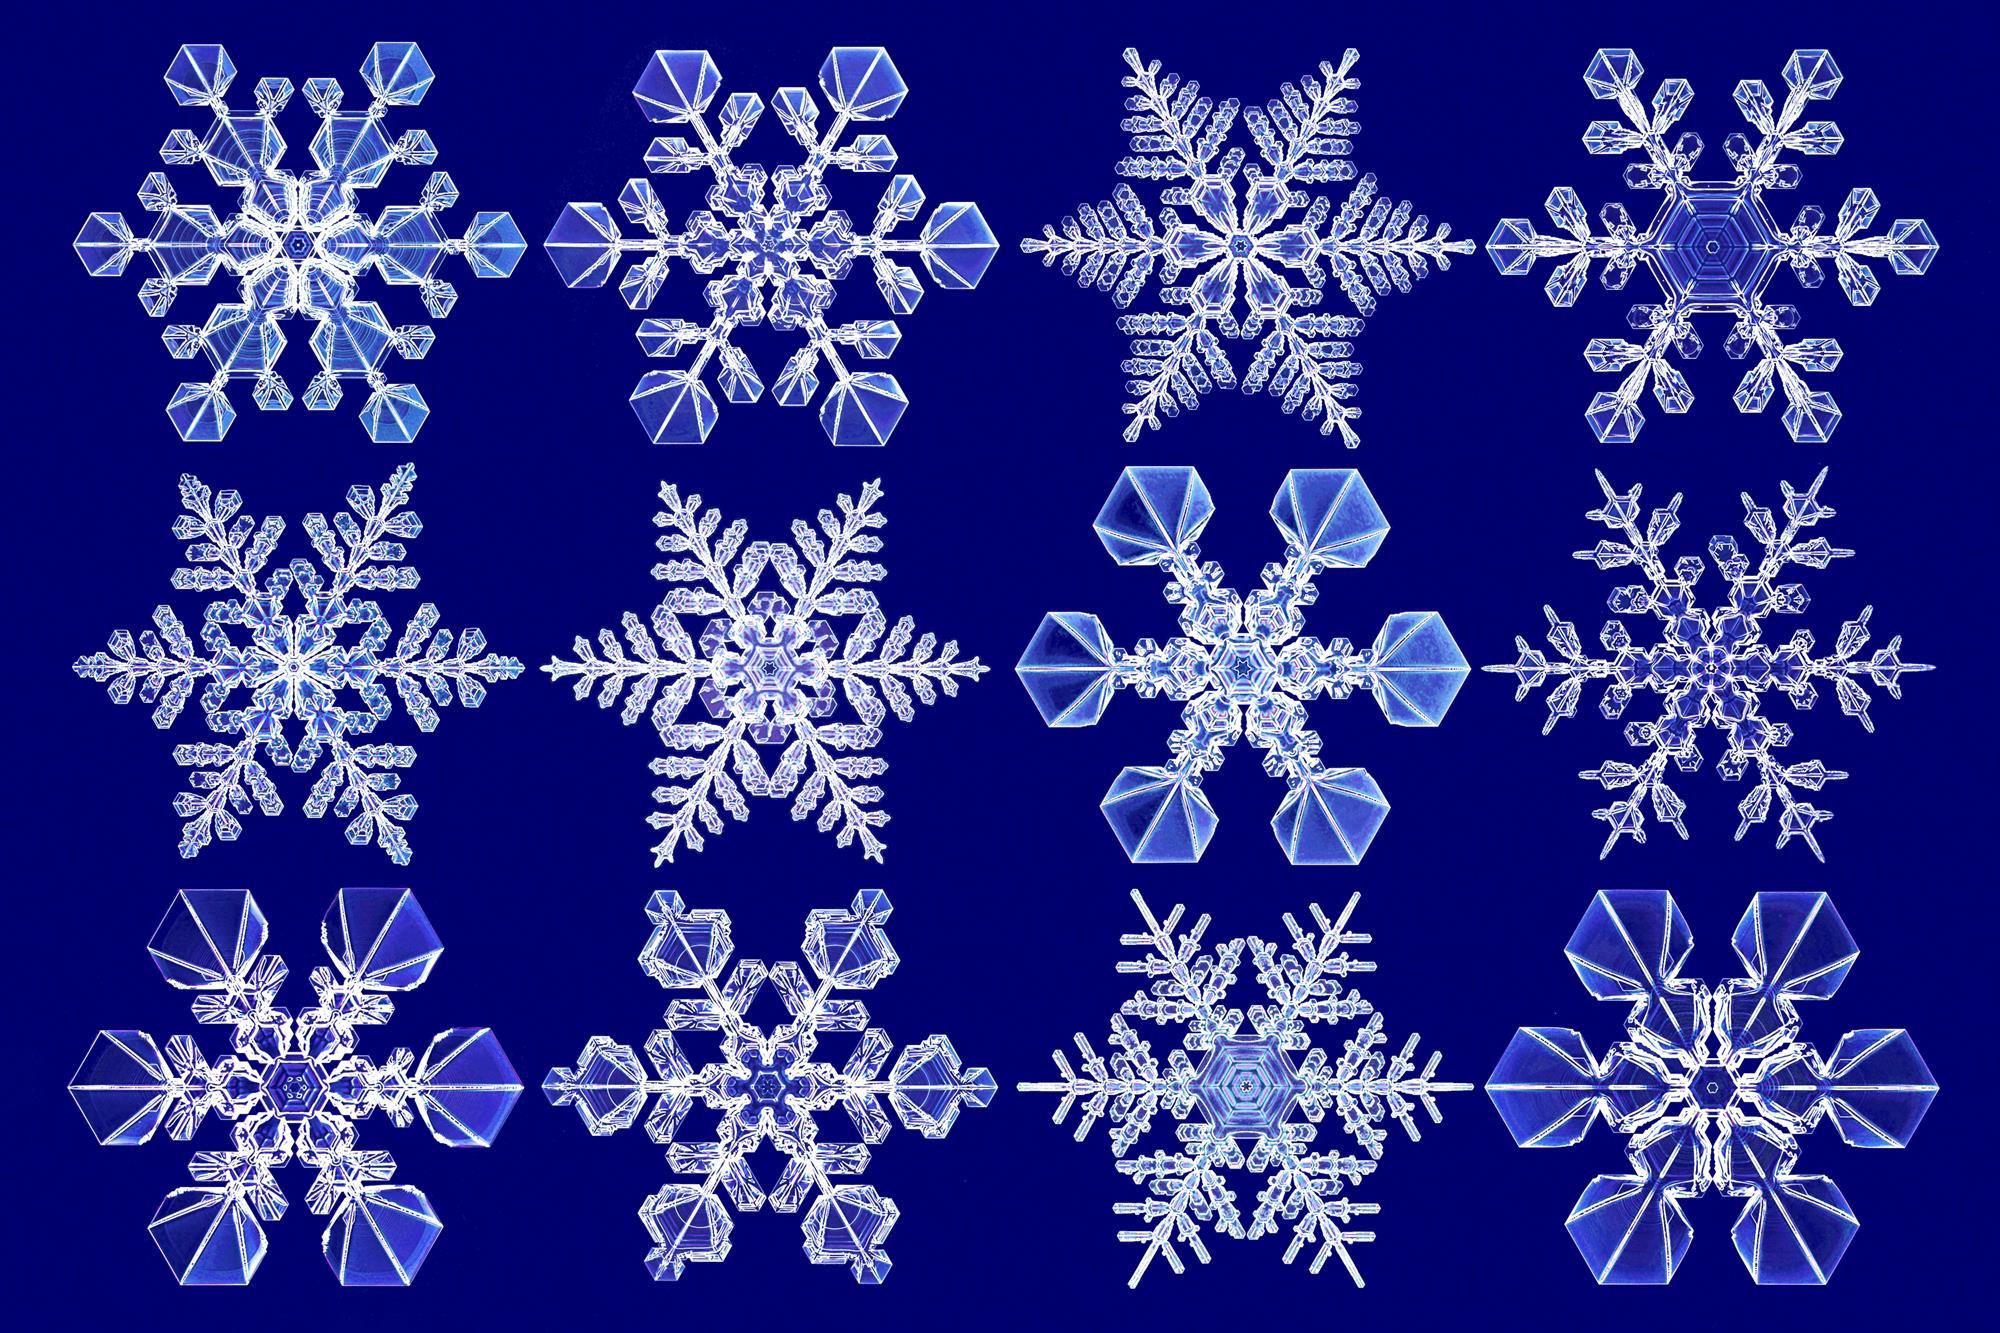 These Are the Highest-Resolution Photos Ever Taken of Snowflakes, Innovation